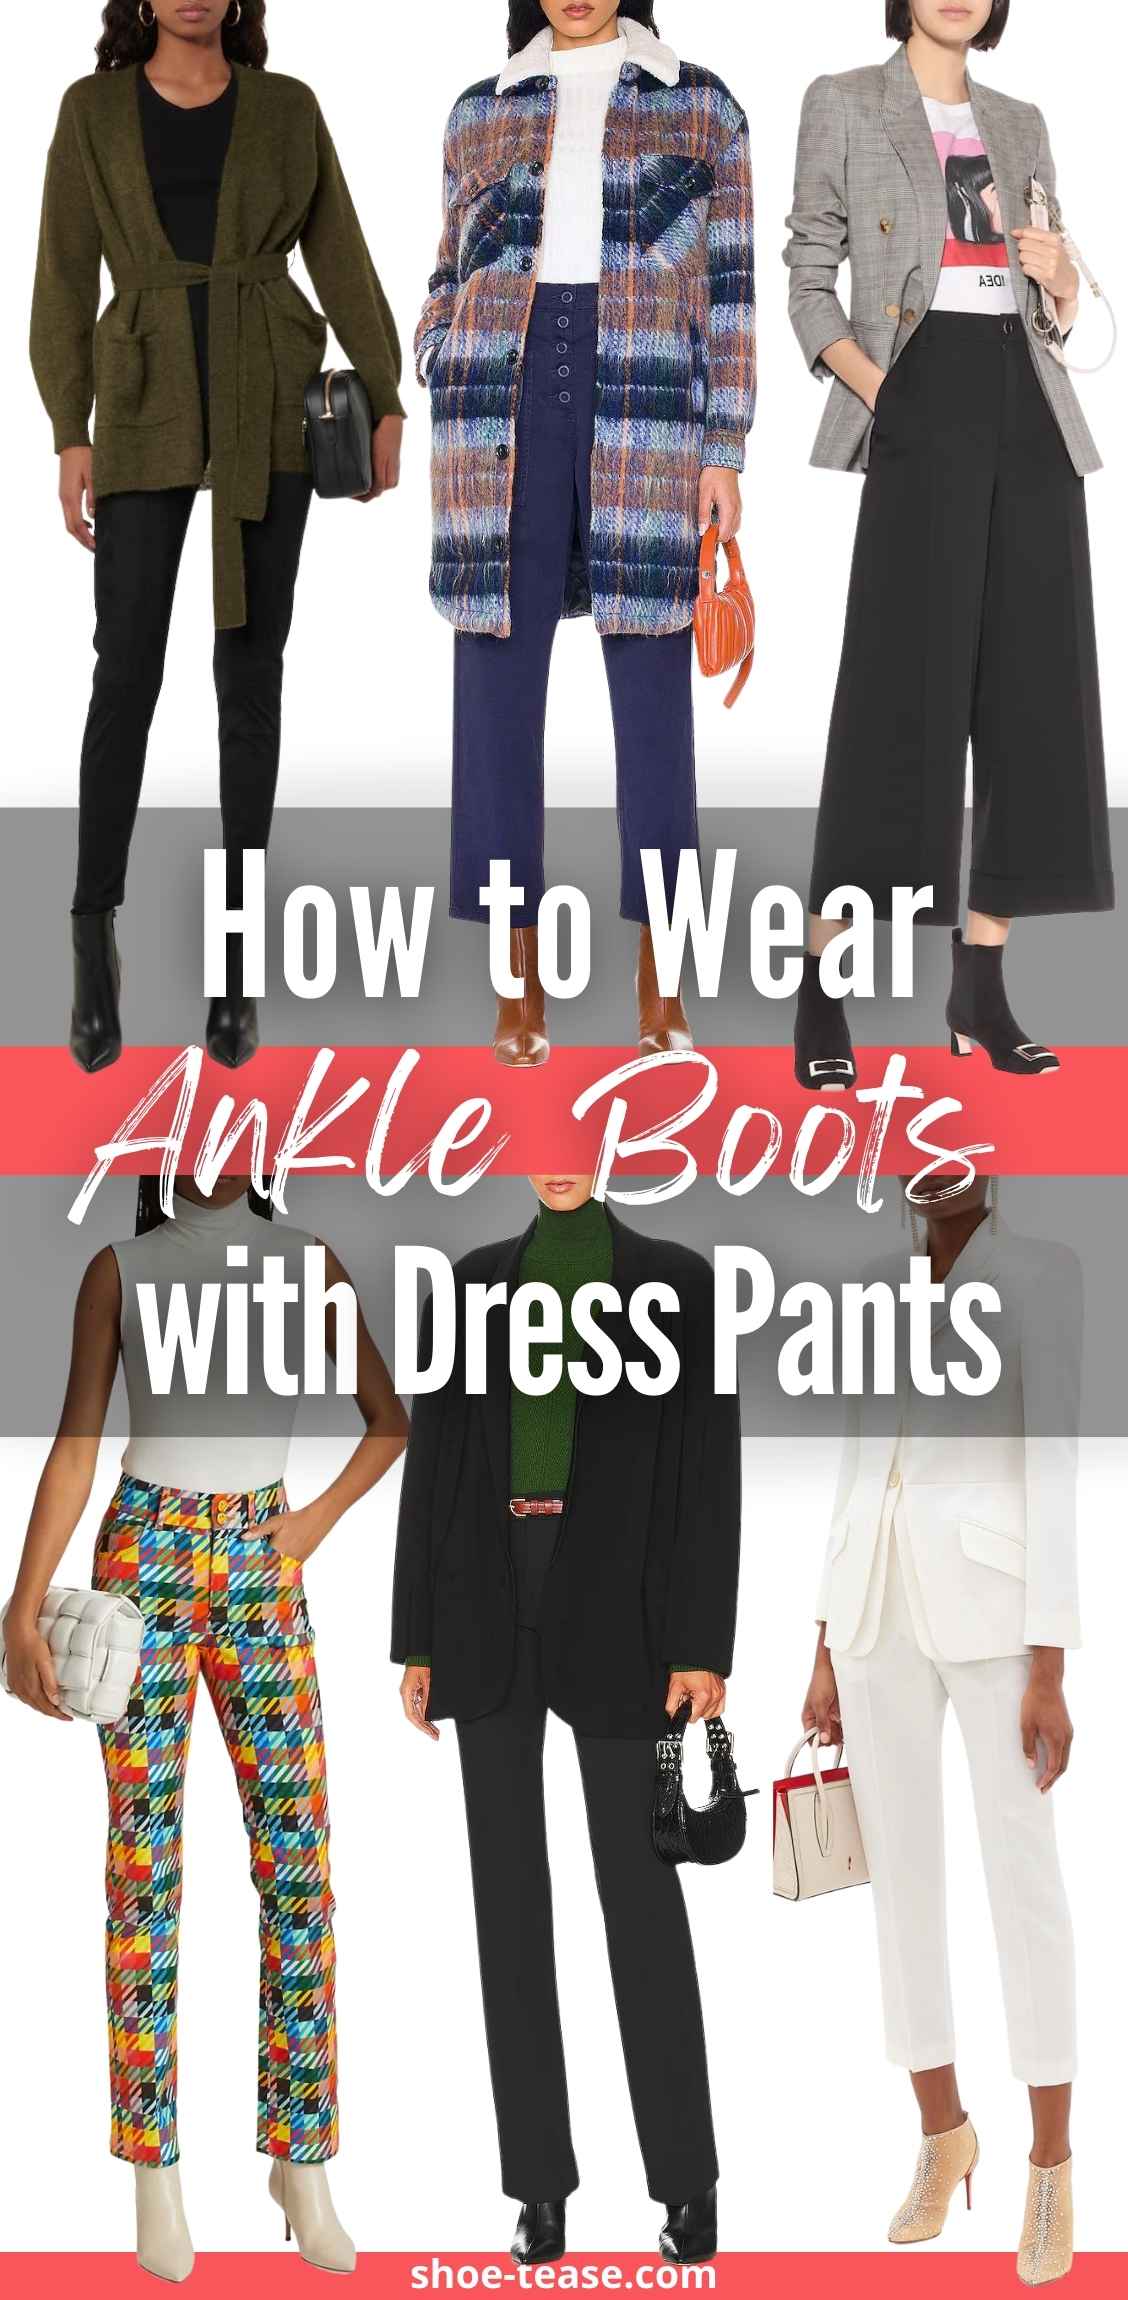 Collage of 6 women wearing different ankle boots with dress pants under text reading how to wear ankle boots with dress pants.